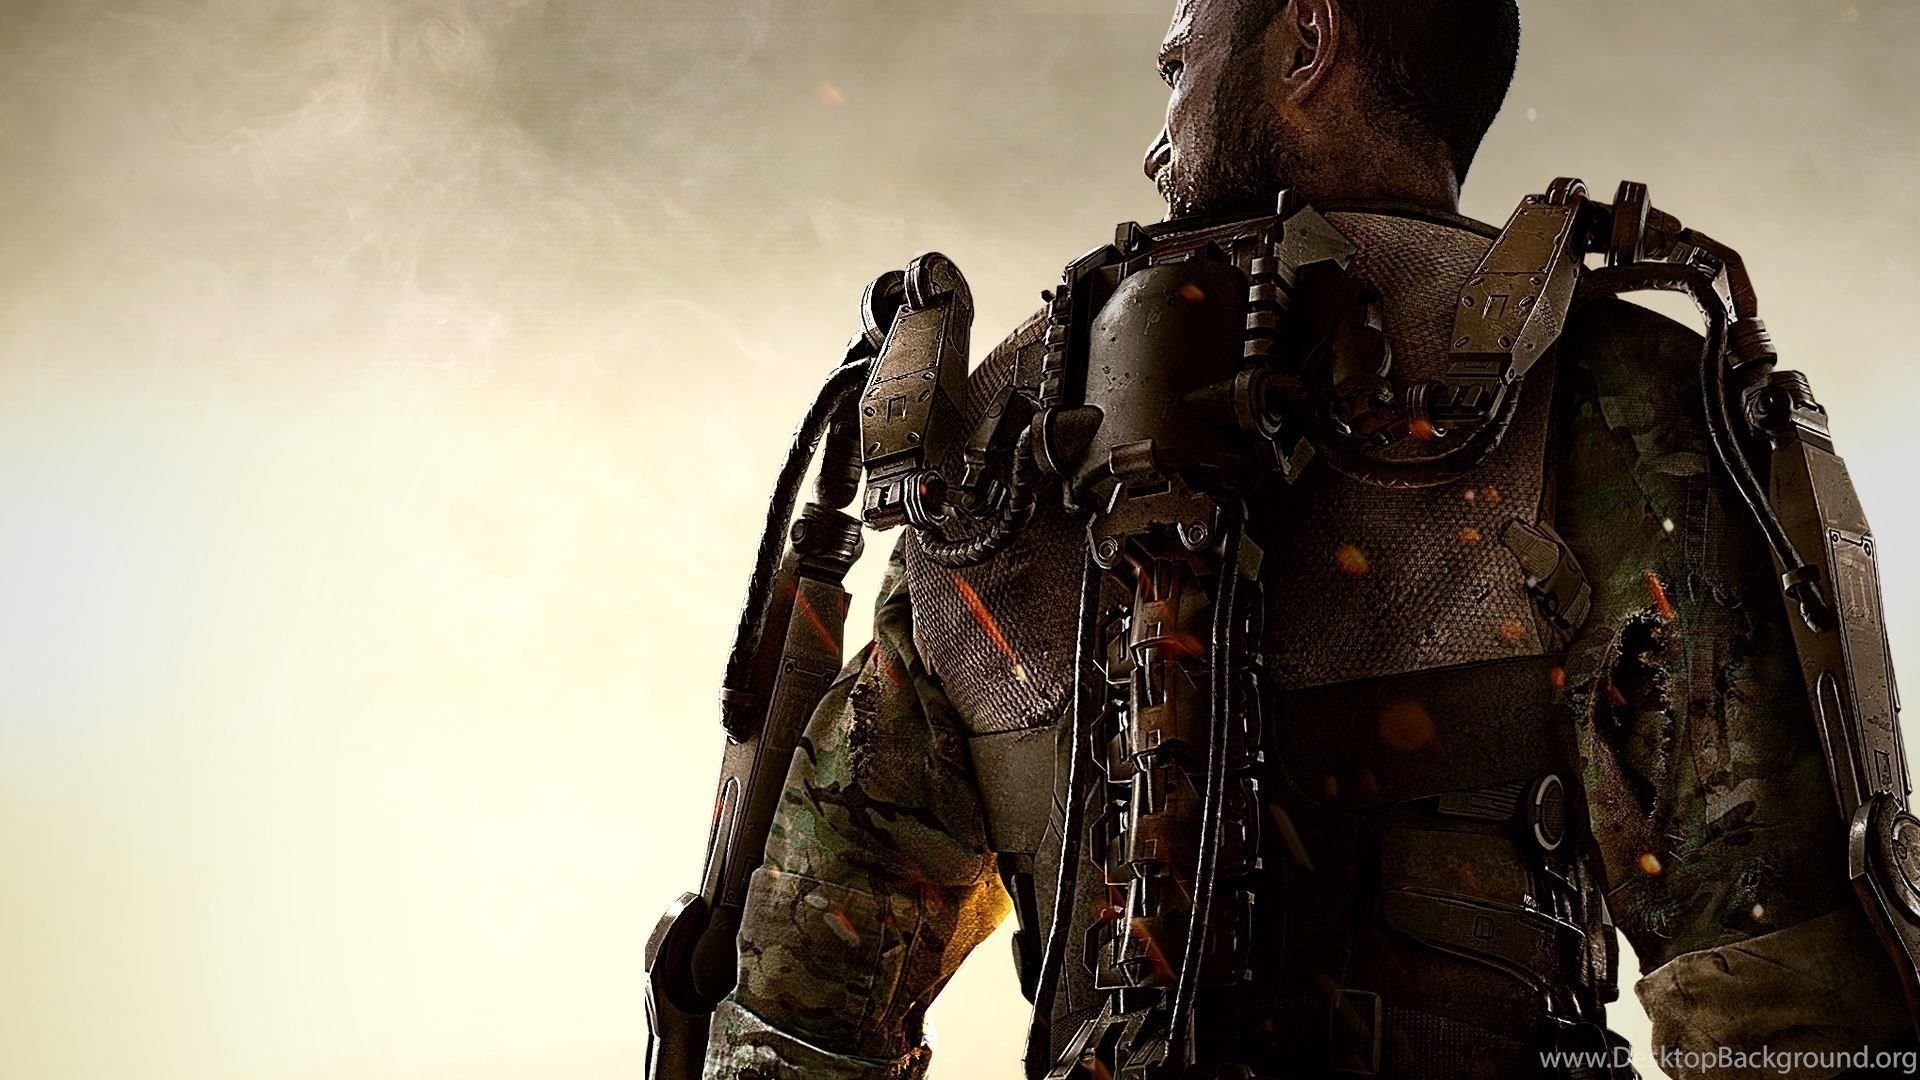 1920x1080 Activision's Call Of Duty After Black Ops 3! Moviepilot.com